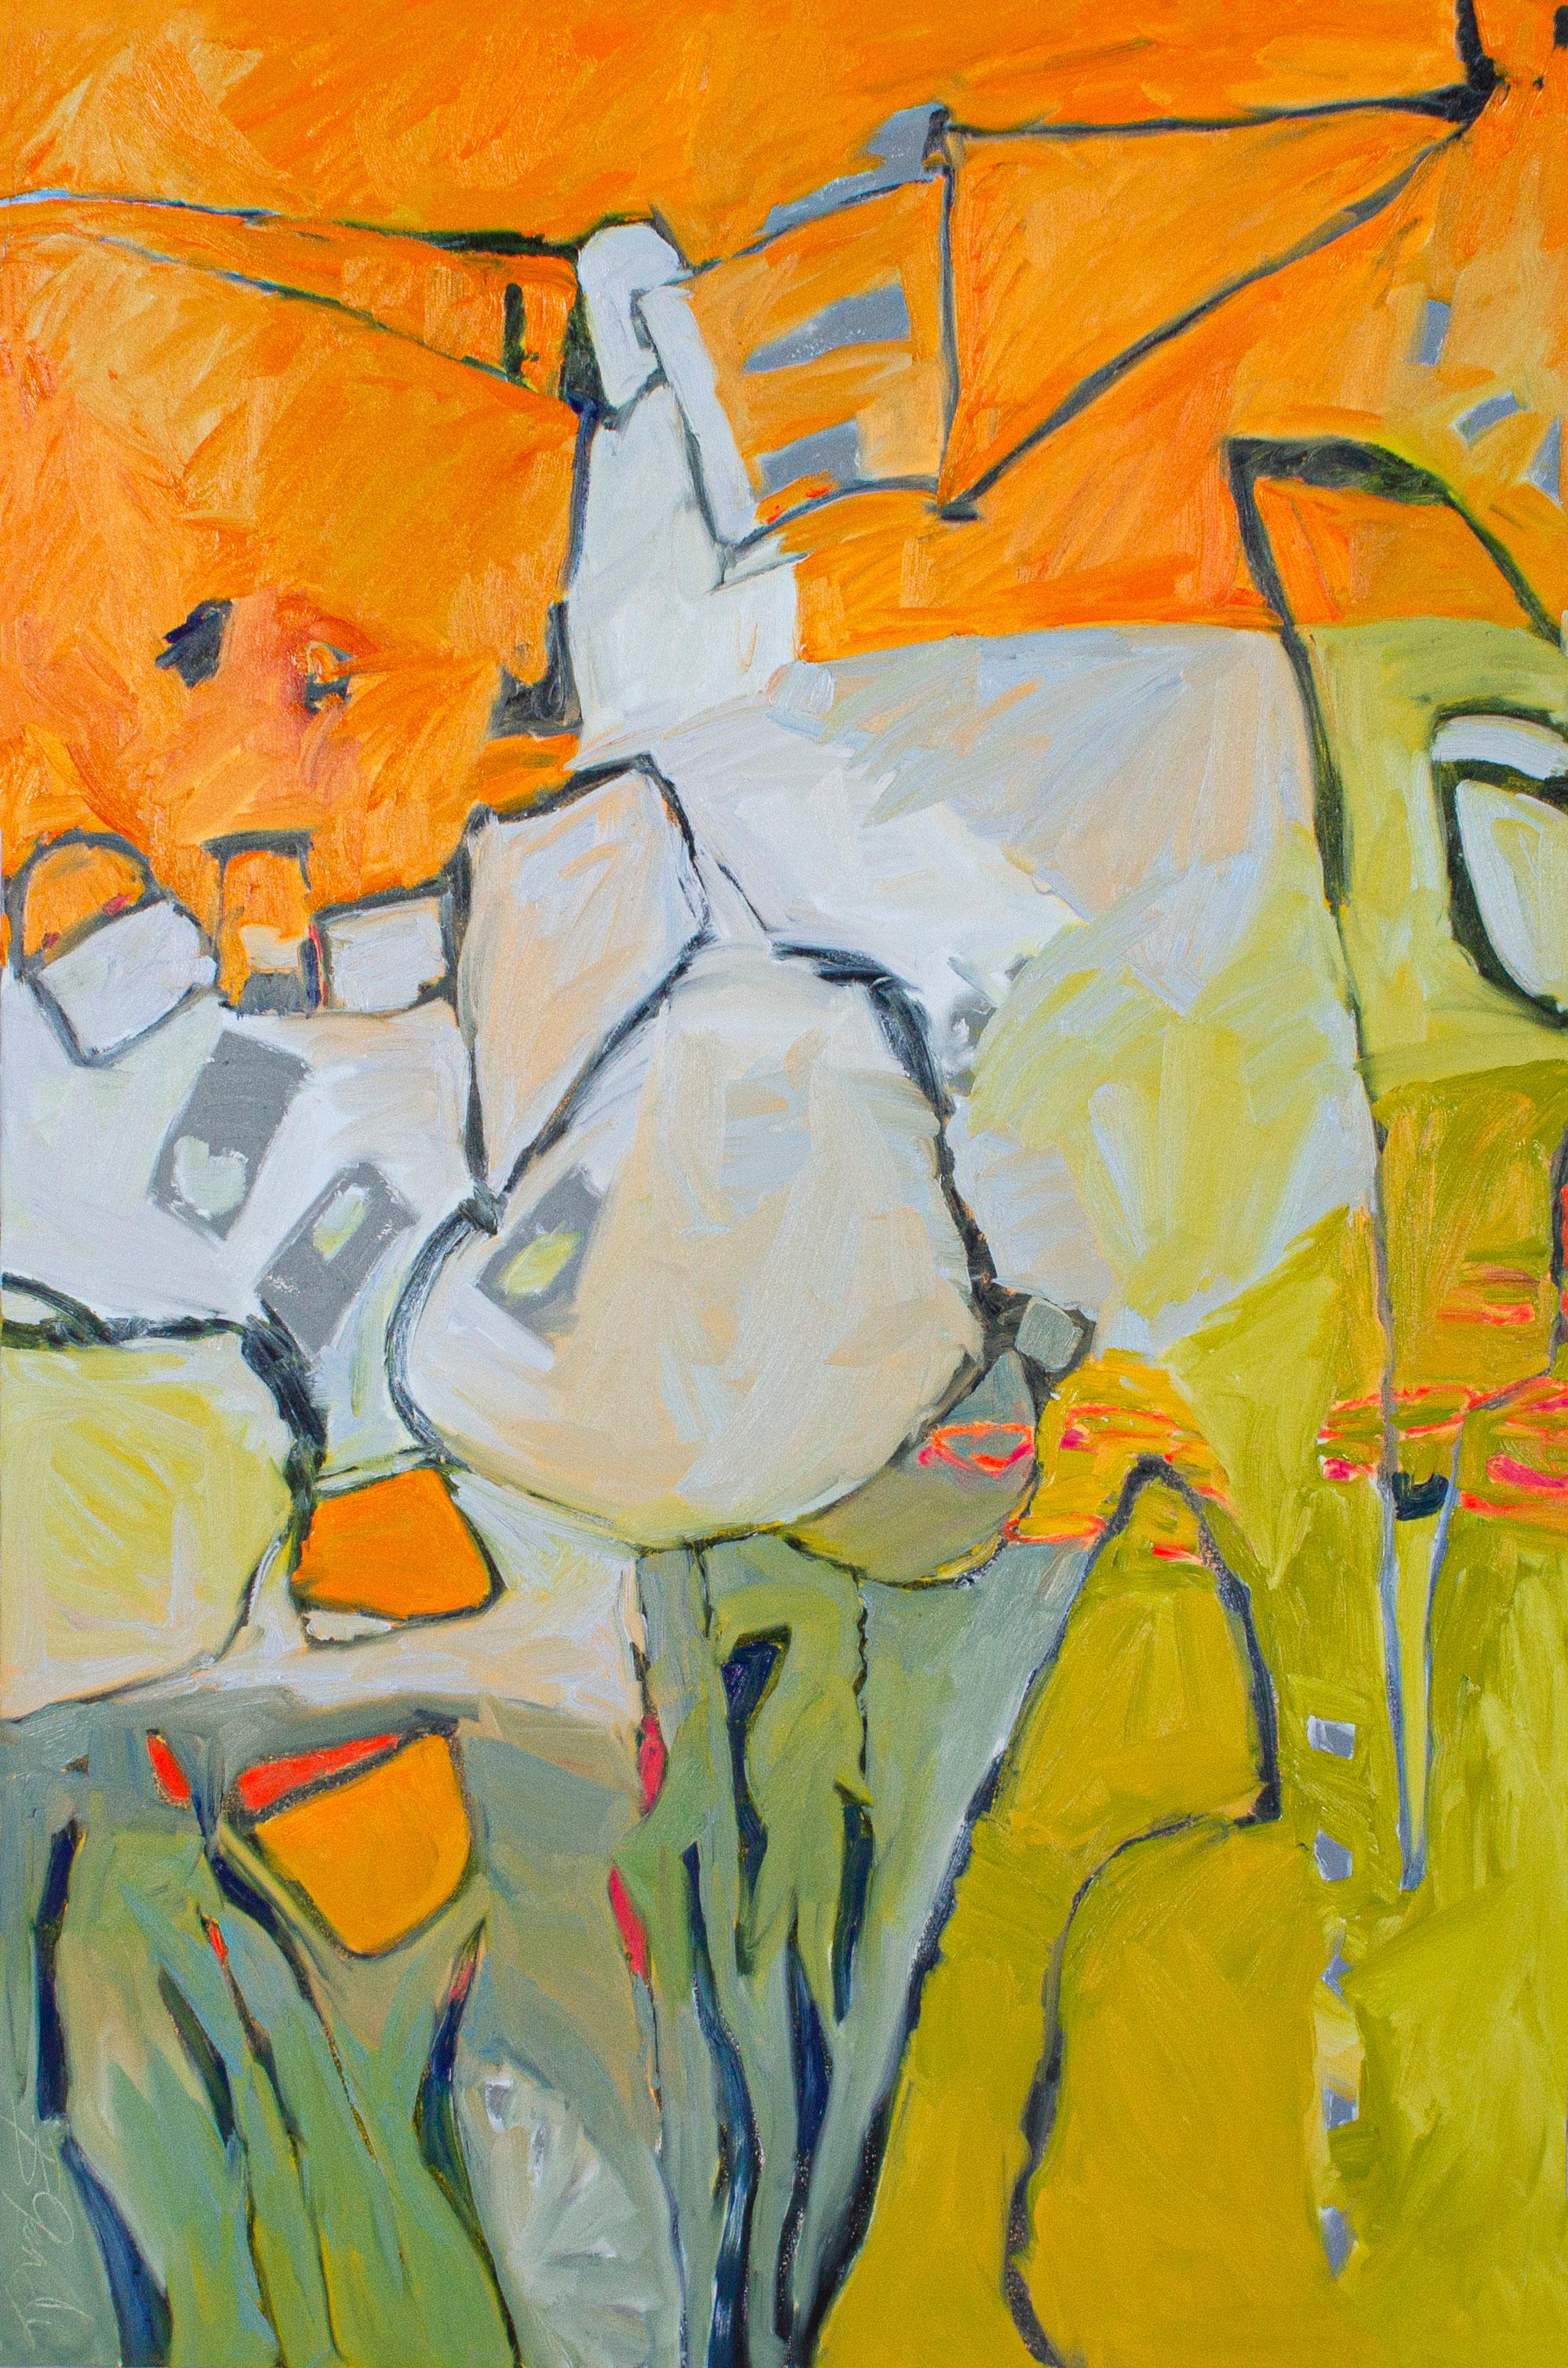 Wall art, painting decor
Beth Gandy 
Orange Crush - Oil on Canvas
Measures: 72 x 48
$7,800.
In my organic, contemporary, vintage and mid-century modern aesthetic.